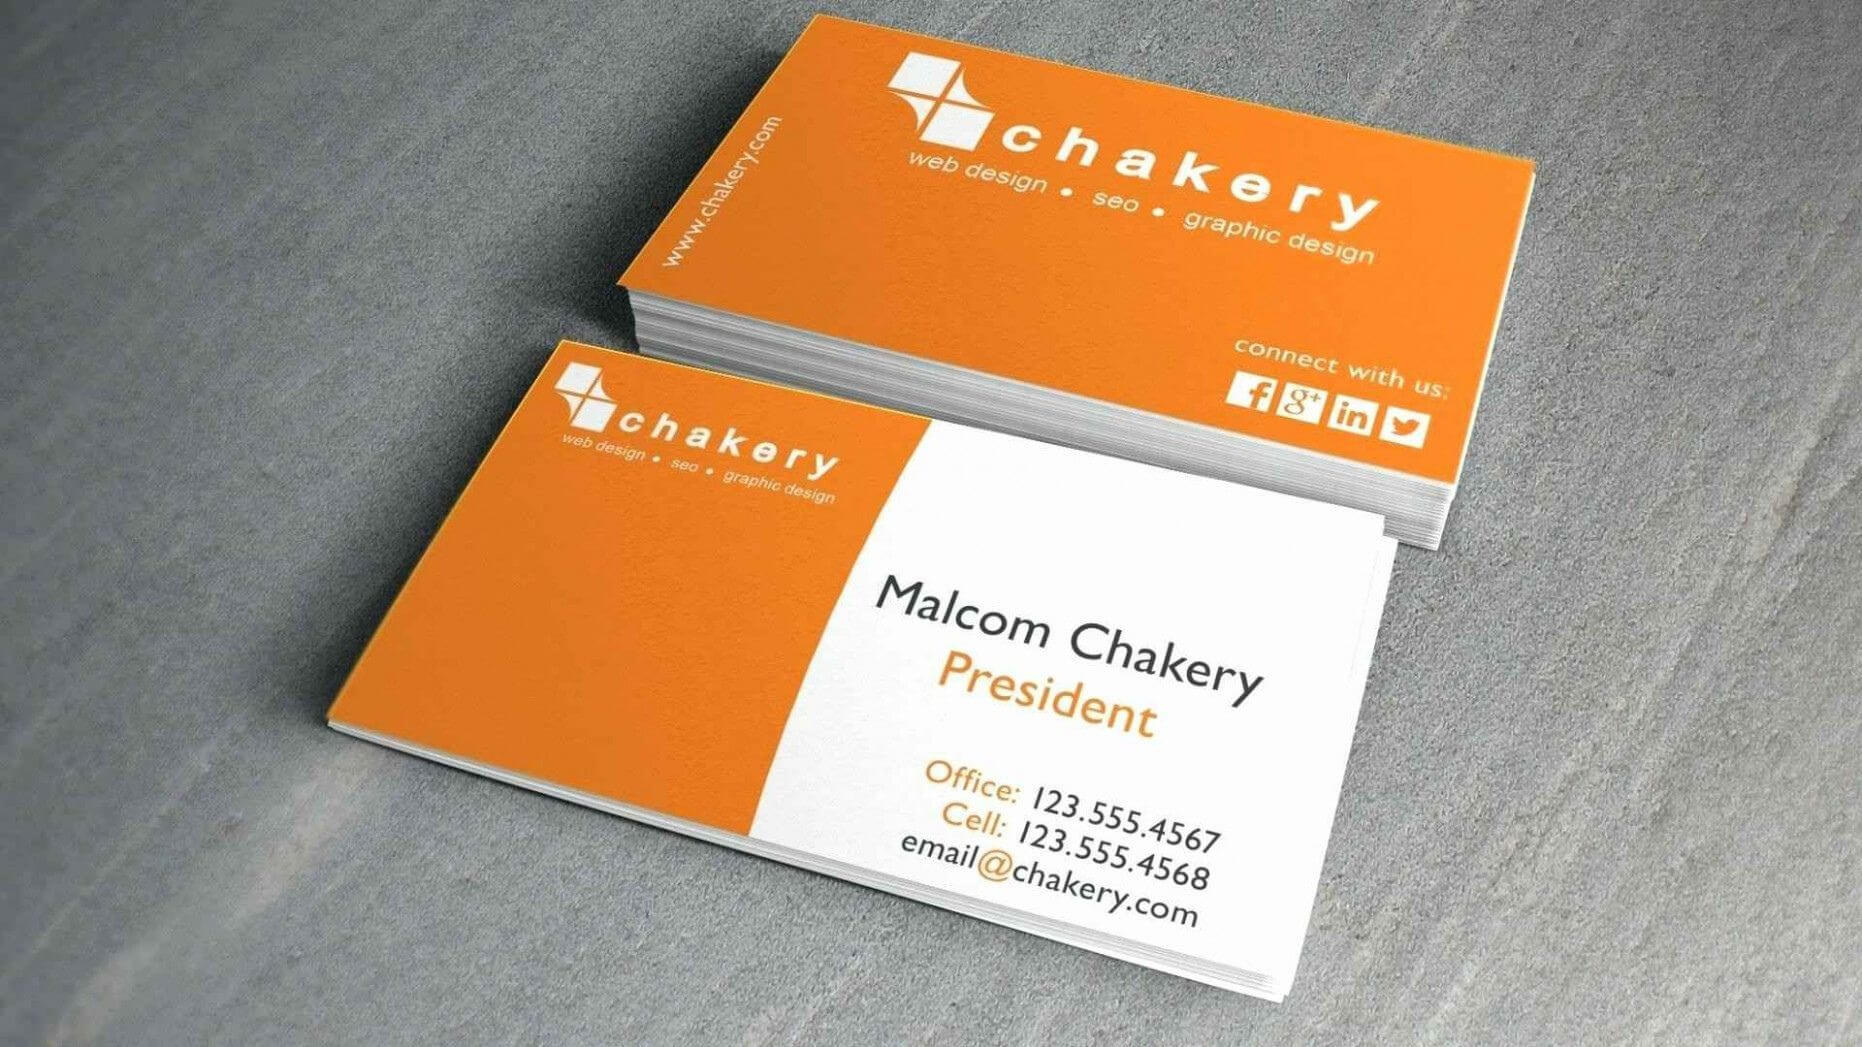 Pinanggunstore On Business Cards With Regard To Office Depot Business Card Template